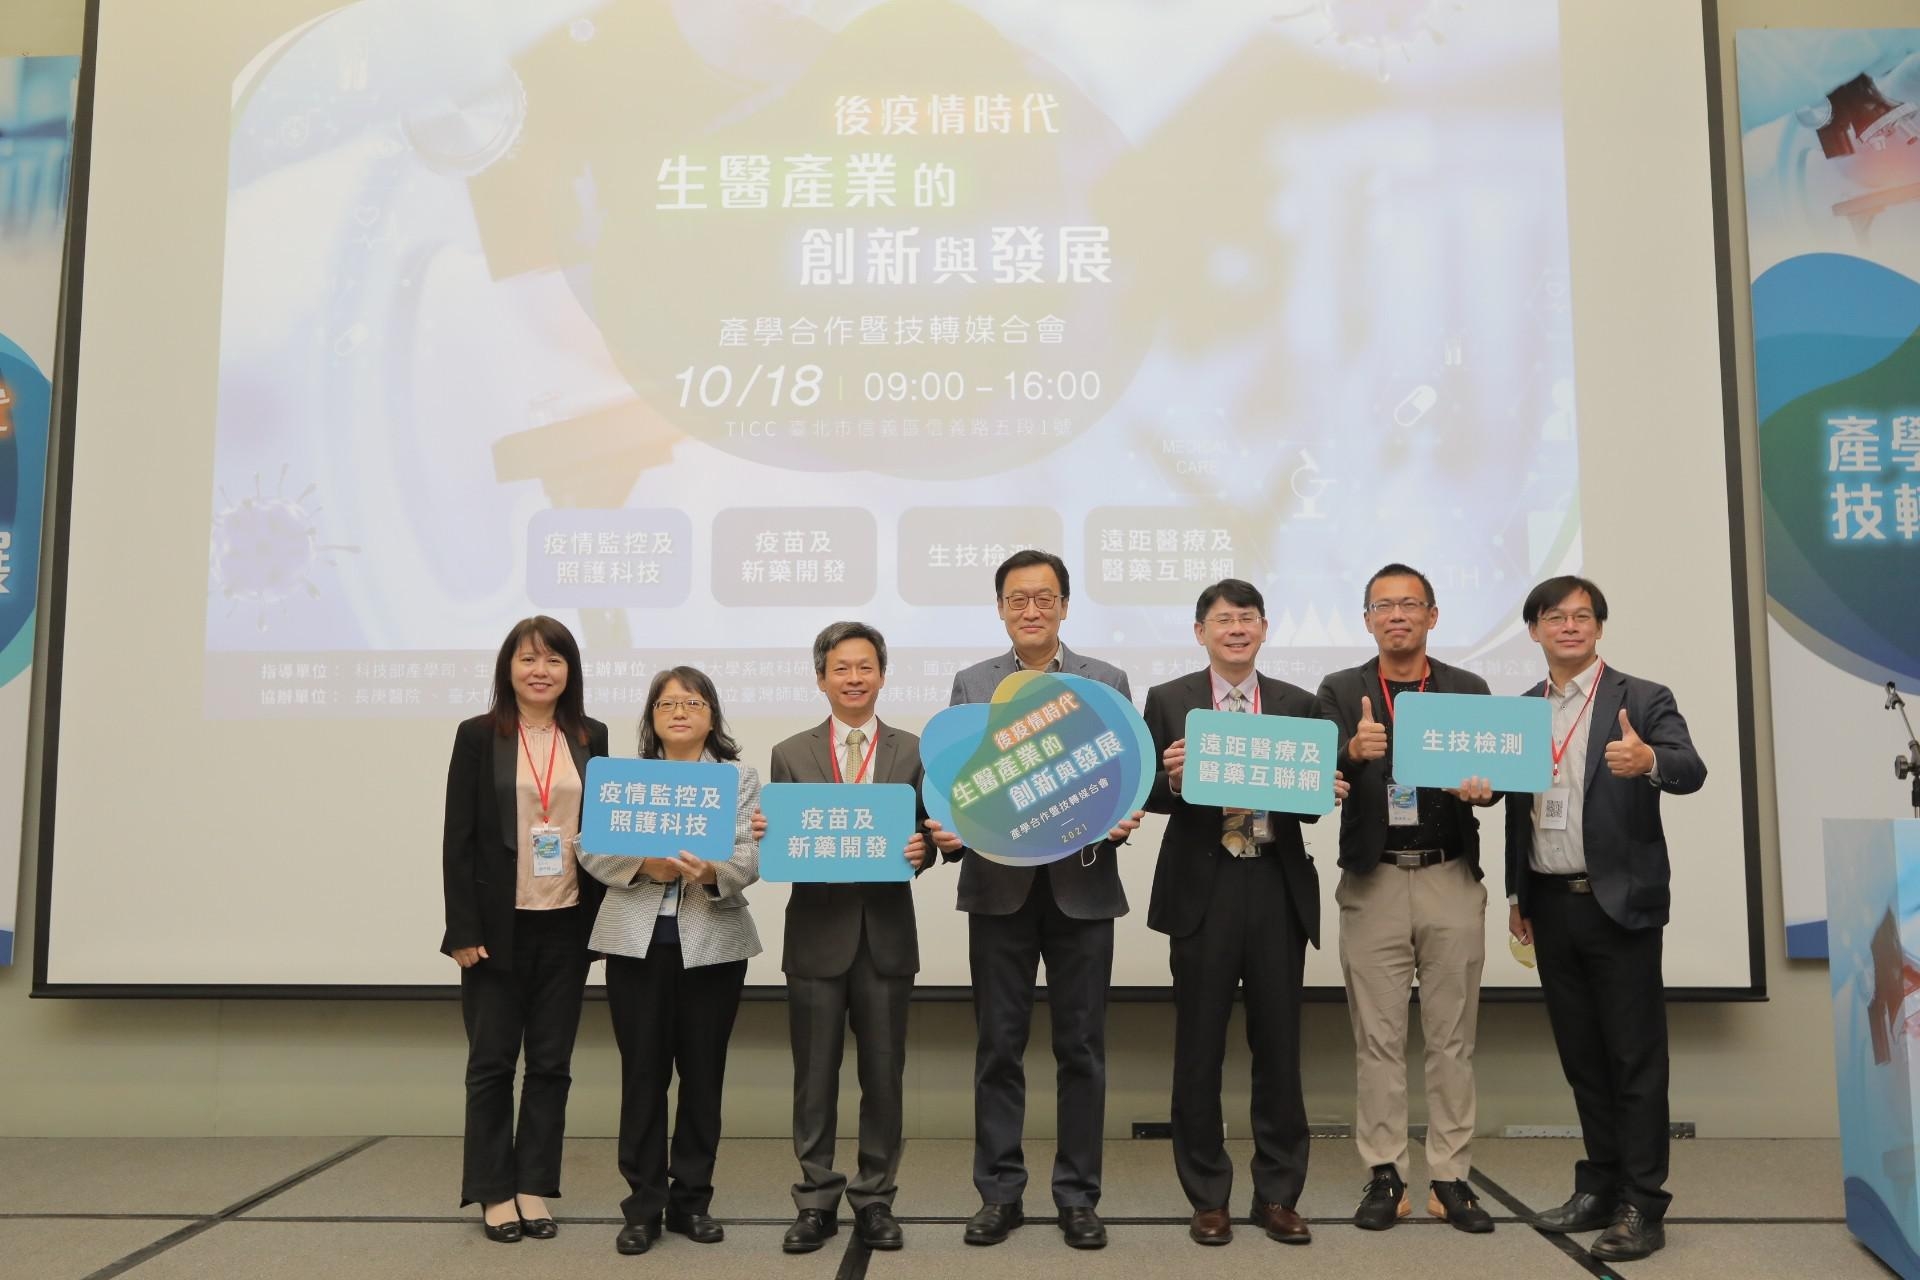 National Taiwan University and Chang Gung University Held Academia-Industry Matchmaking Event, Hoping to Spark Momentum in Biomedical Industry